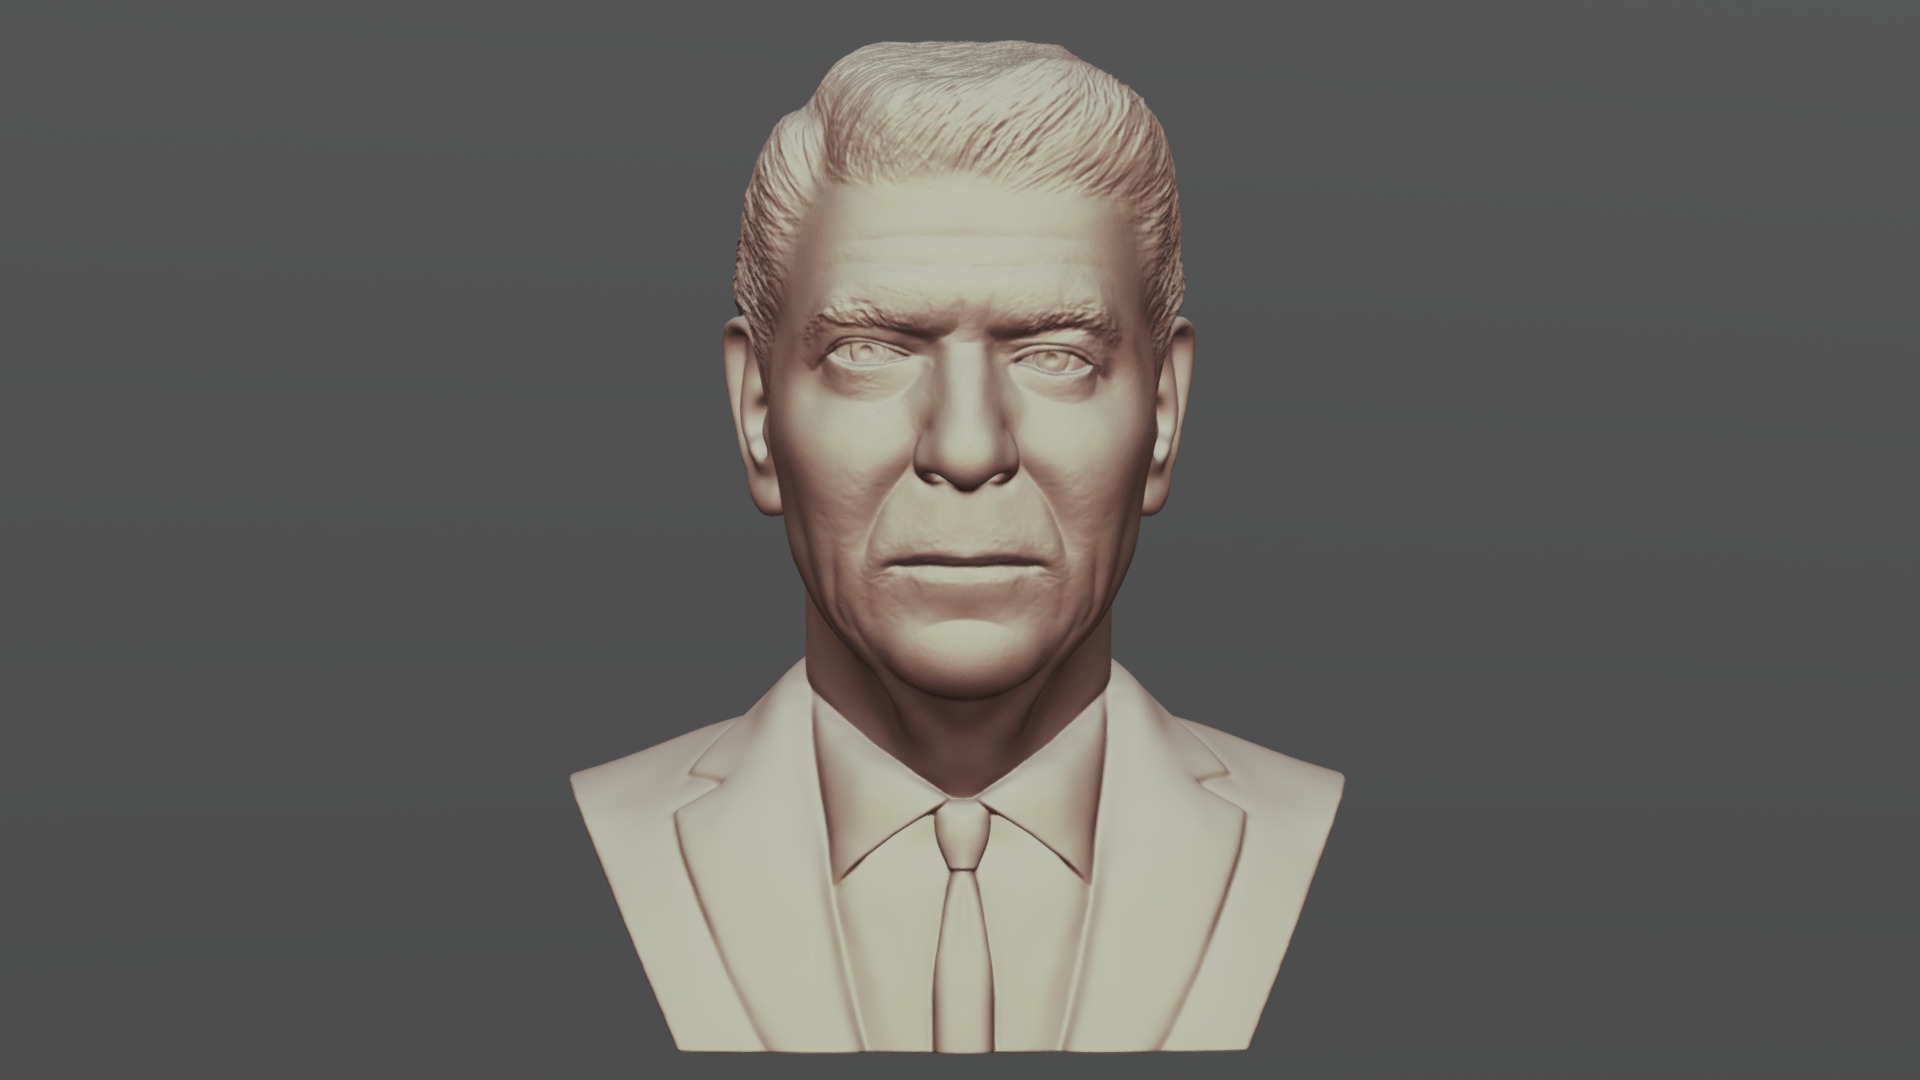 3D model Ronald Reagan bust for 3D printing - This is a 3D model of the Ronald Reagan bust for 3D printing. The 3D model is about a man with a serious expression.